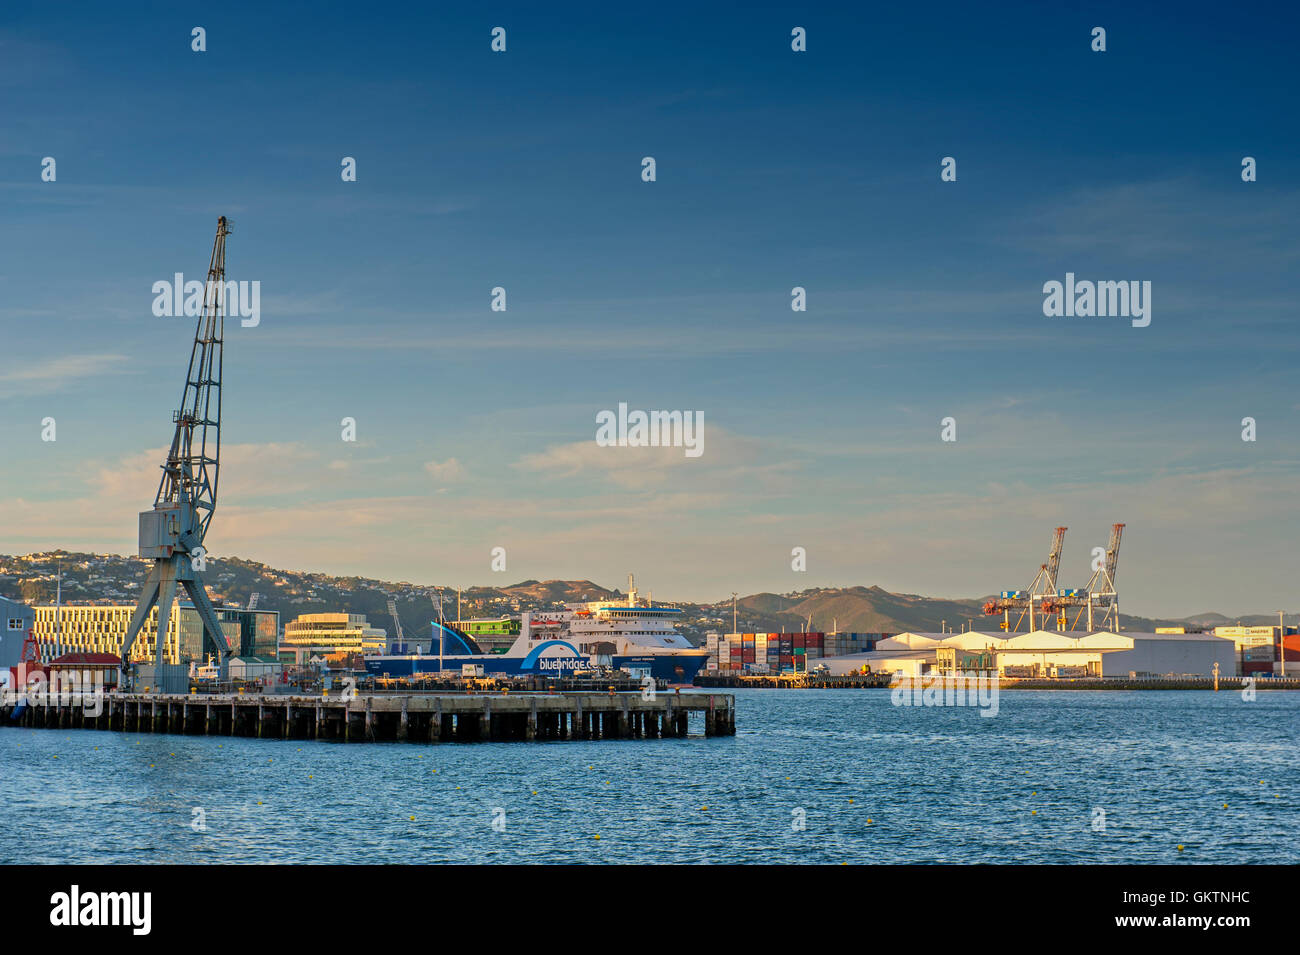 Wellington, New Zealand - March 3, 2016: Ferry pier at Wellington waterfront, north island of New Zealand Stock Photo